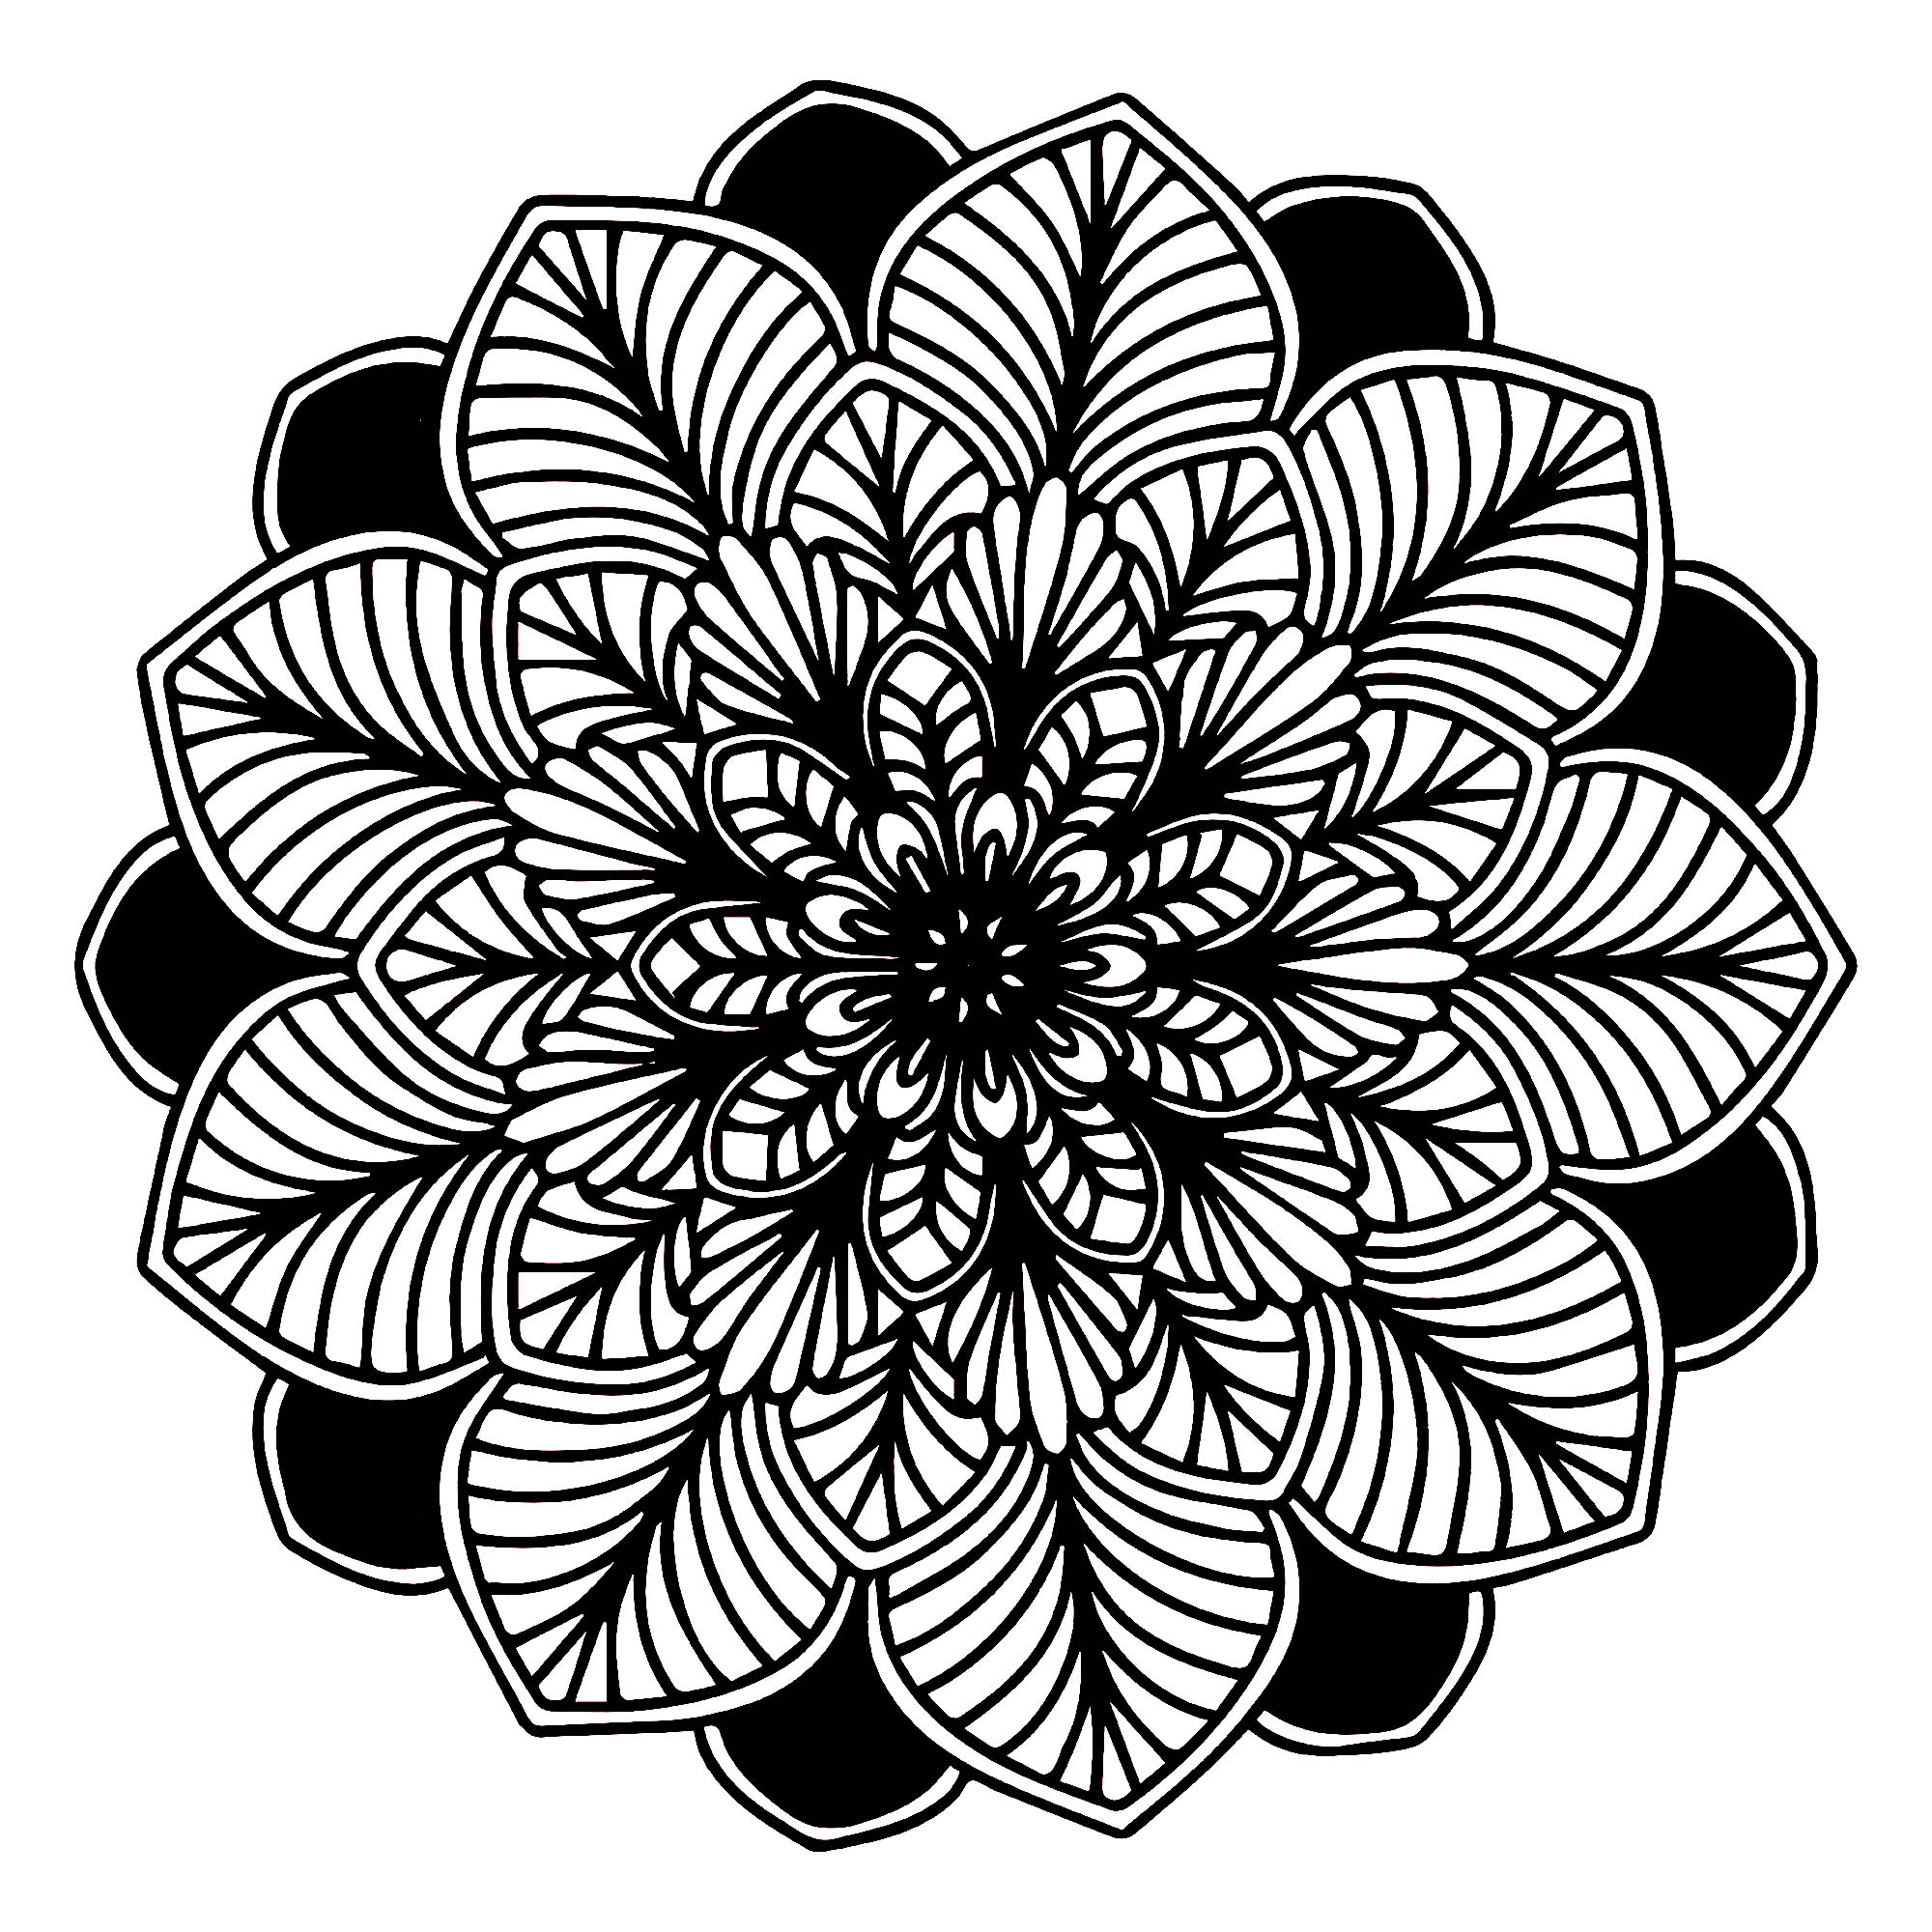 50 best ideas for coloring | Free Black And White Coloring Pages